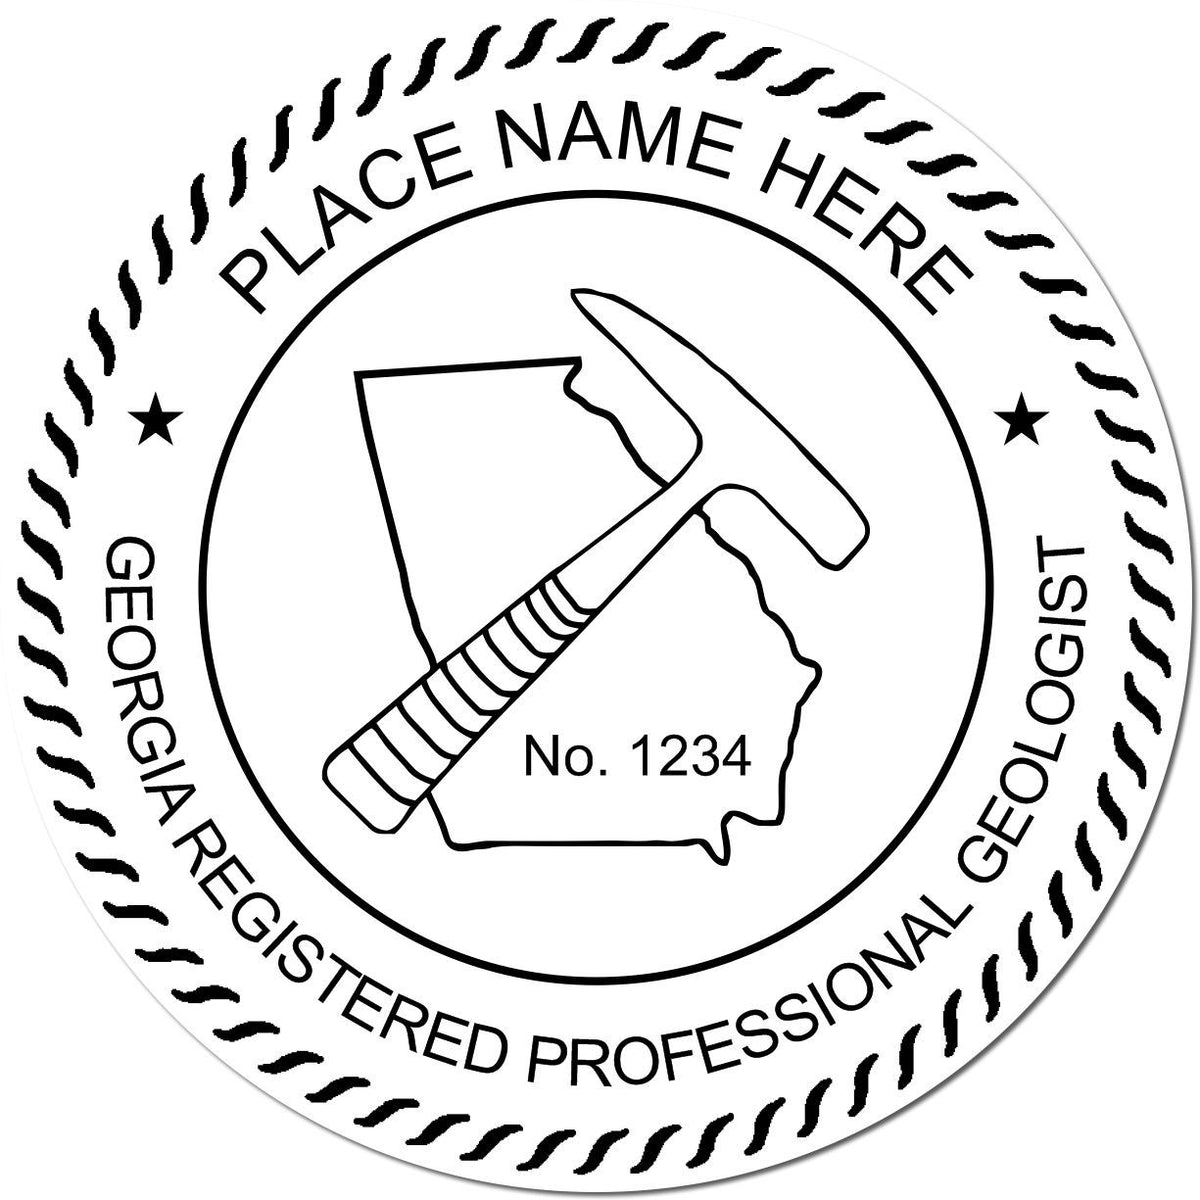 This paper is stamped with a sample imprint of the Slim Pre-Inked Georgia Professional Geologist Seal Stamp, signifying its quality and reliability.